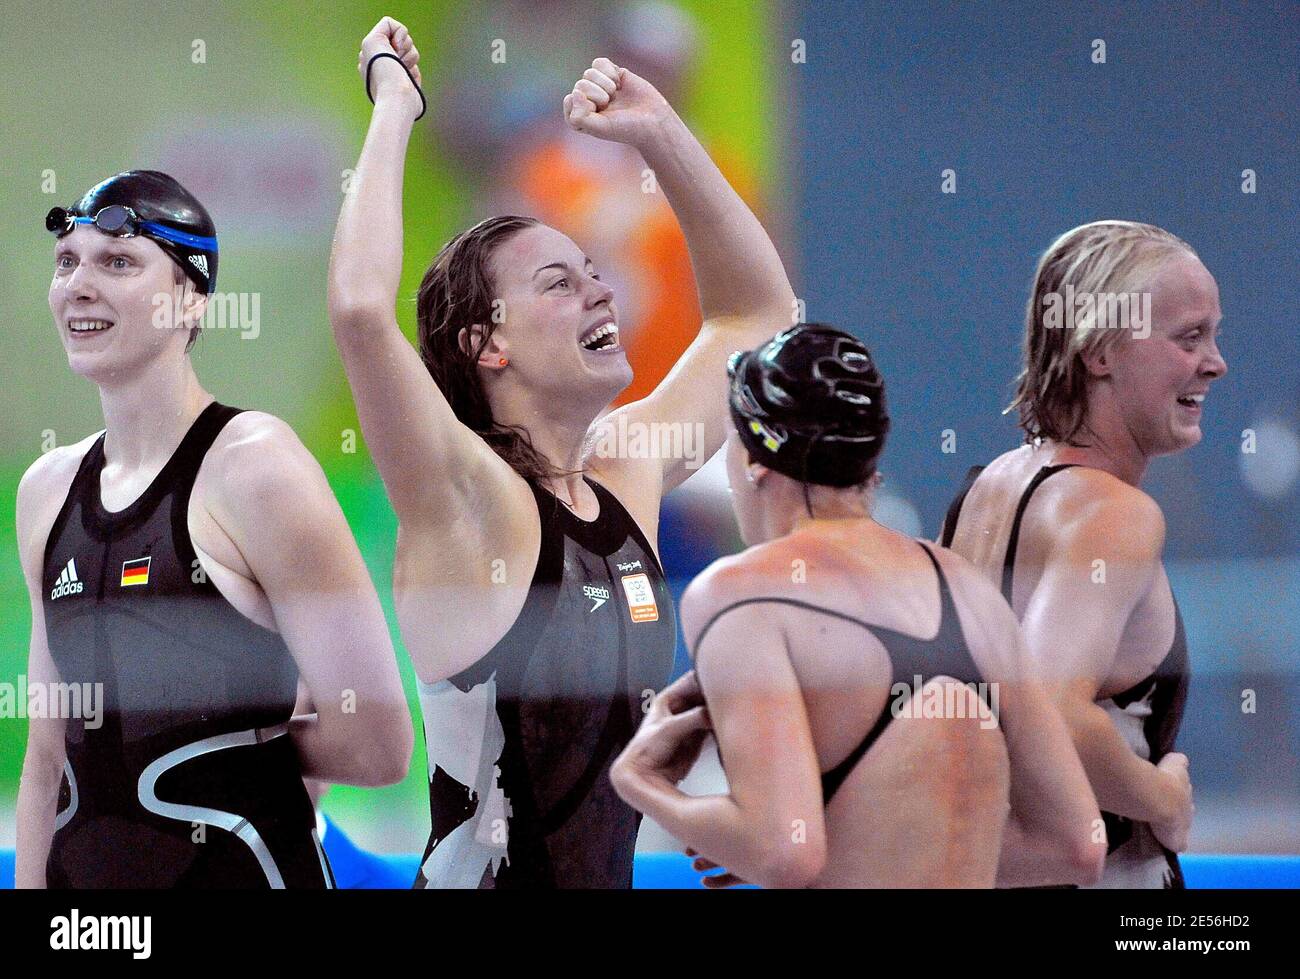 Netherland's women's 4x100m Relay team celebrate during the XXIX Olympiad at the National Aquatics Center in Beijing, China on August 10, 2008. Photo by Jing Min/Cameleon/ABACAPRESS.COM Stock Photo